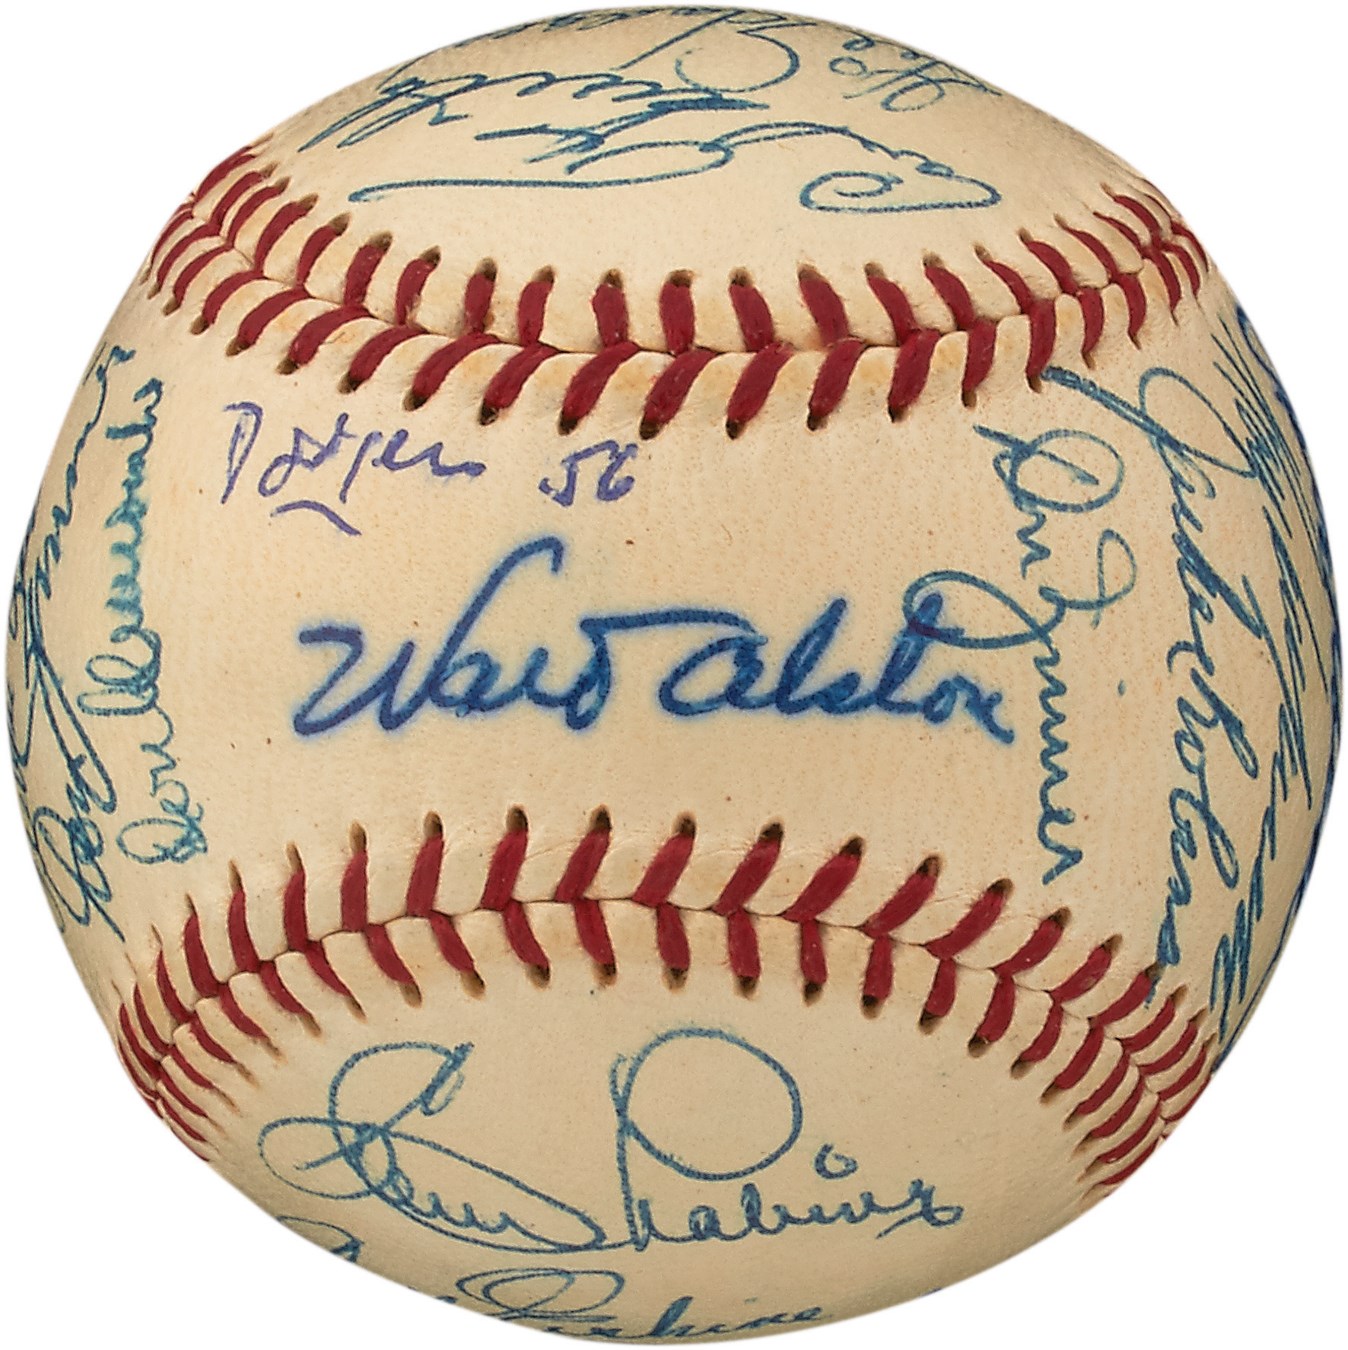 High Grade 1956 Brooklyn Dodgers Team-Signed Baseball with Robinson & Campy (PSA/DNA)